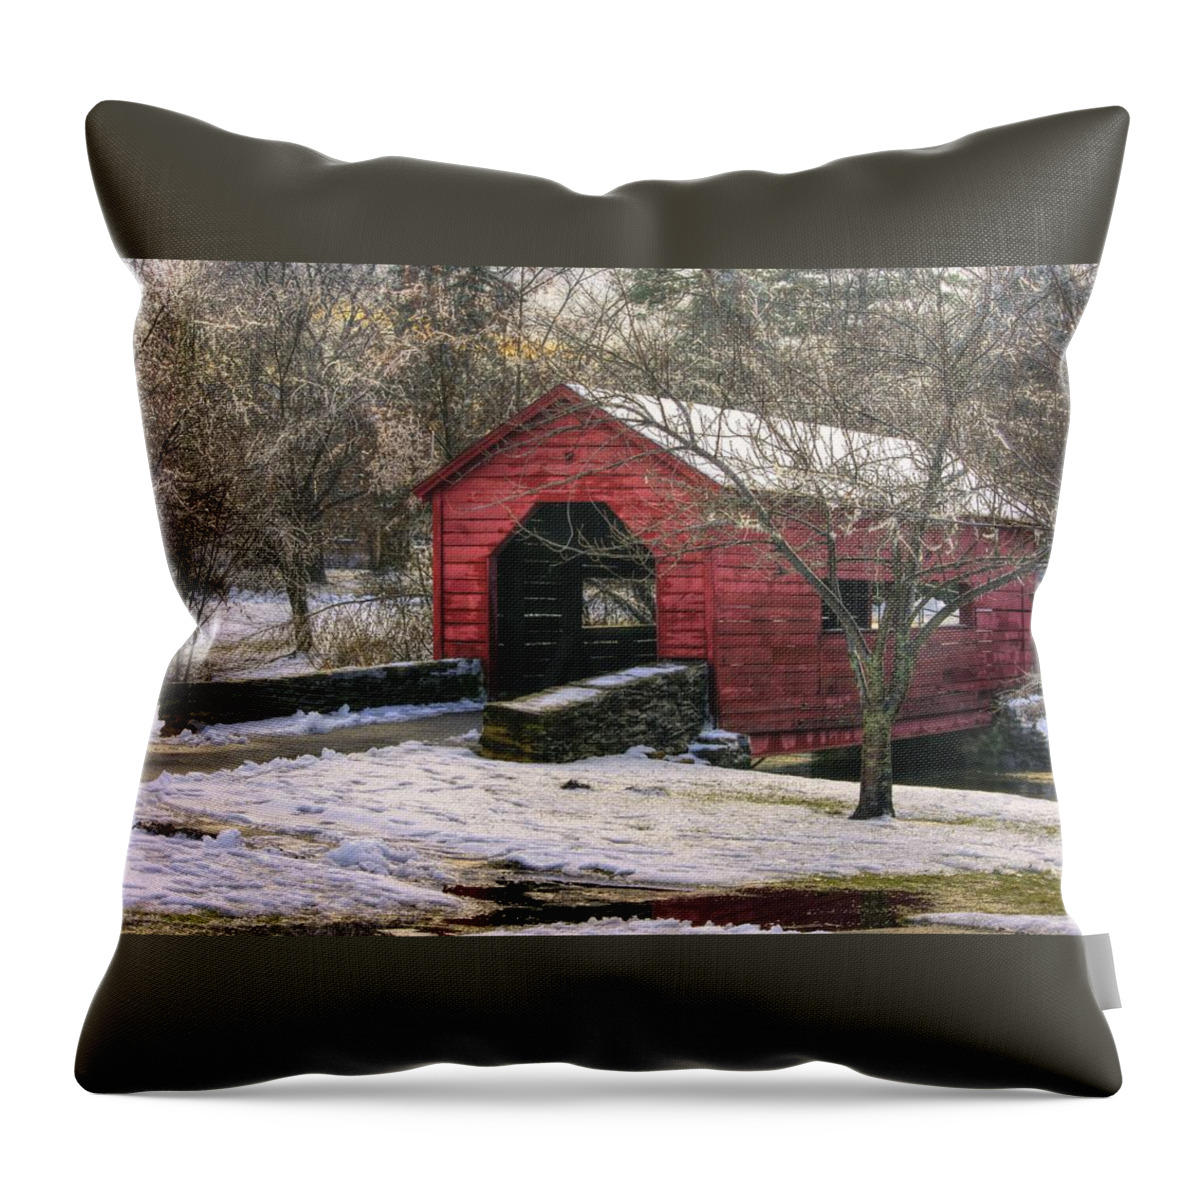 Carroll Creek Covered Bridge Throw Pillow featuring the photograph Winter Crossing in Elegance - Carroll Creek Covered Bridge - Baker Park Frederick Maryland by Michael Mazaika